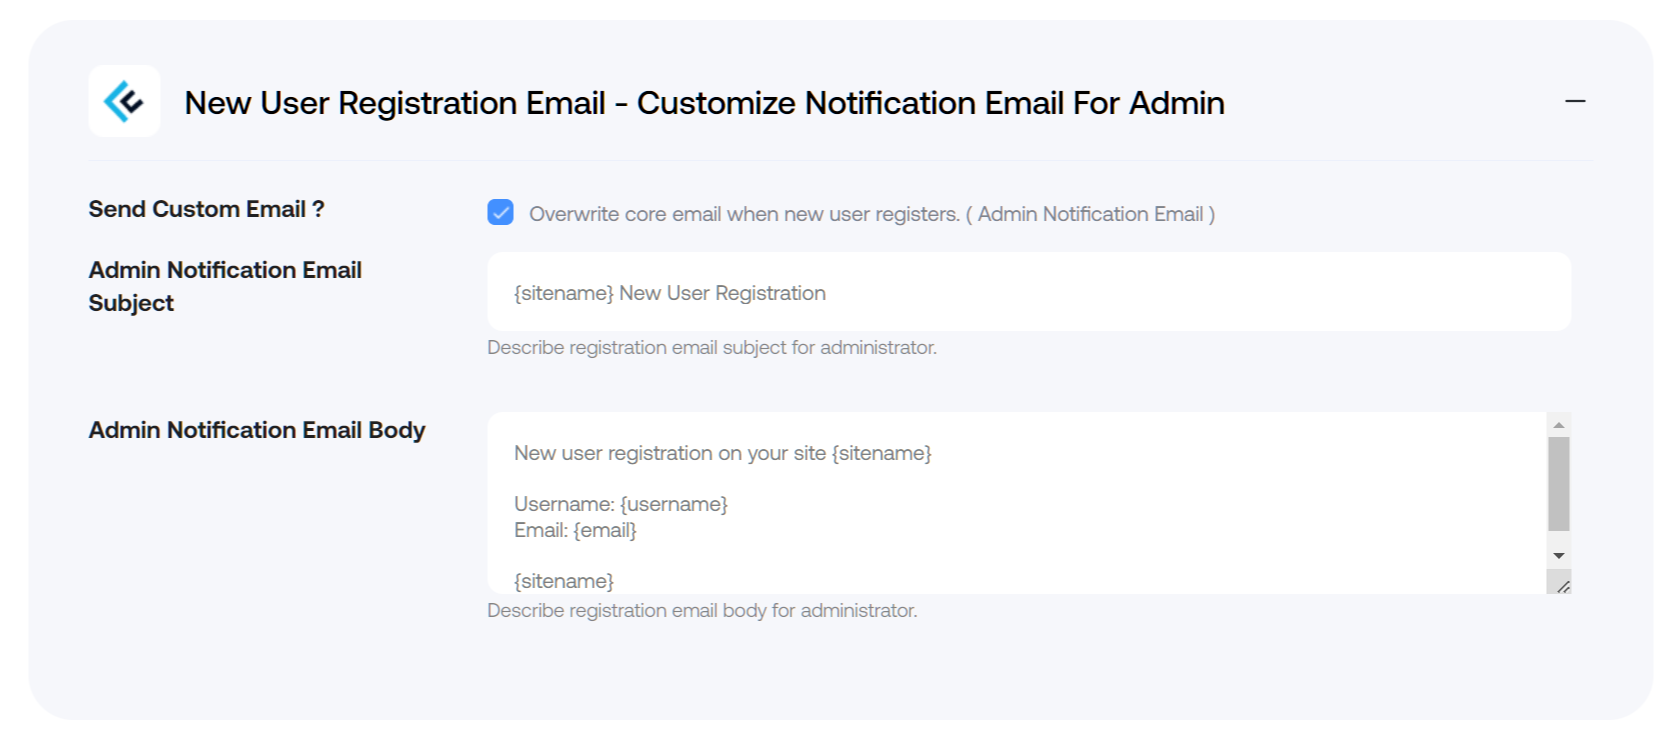 New User Registration Email - Customize Notification Email for Admin